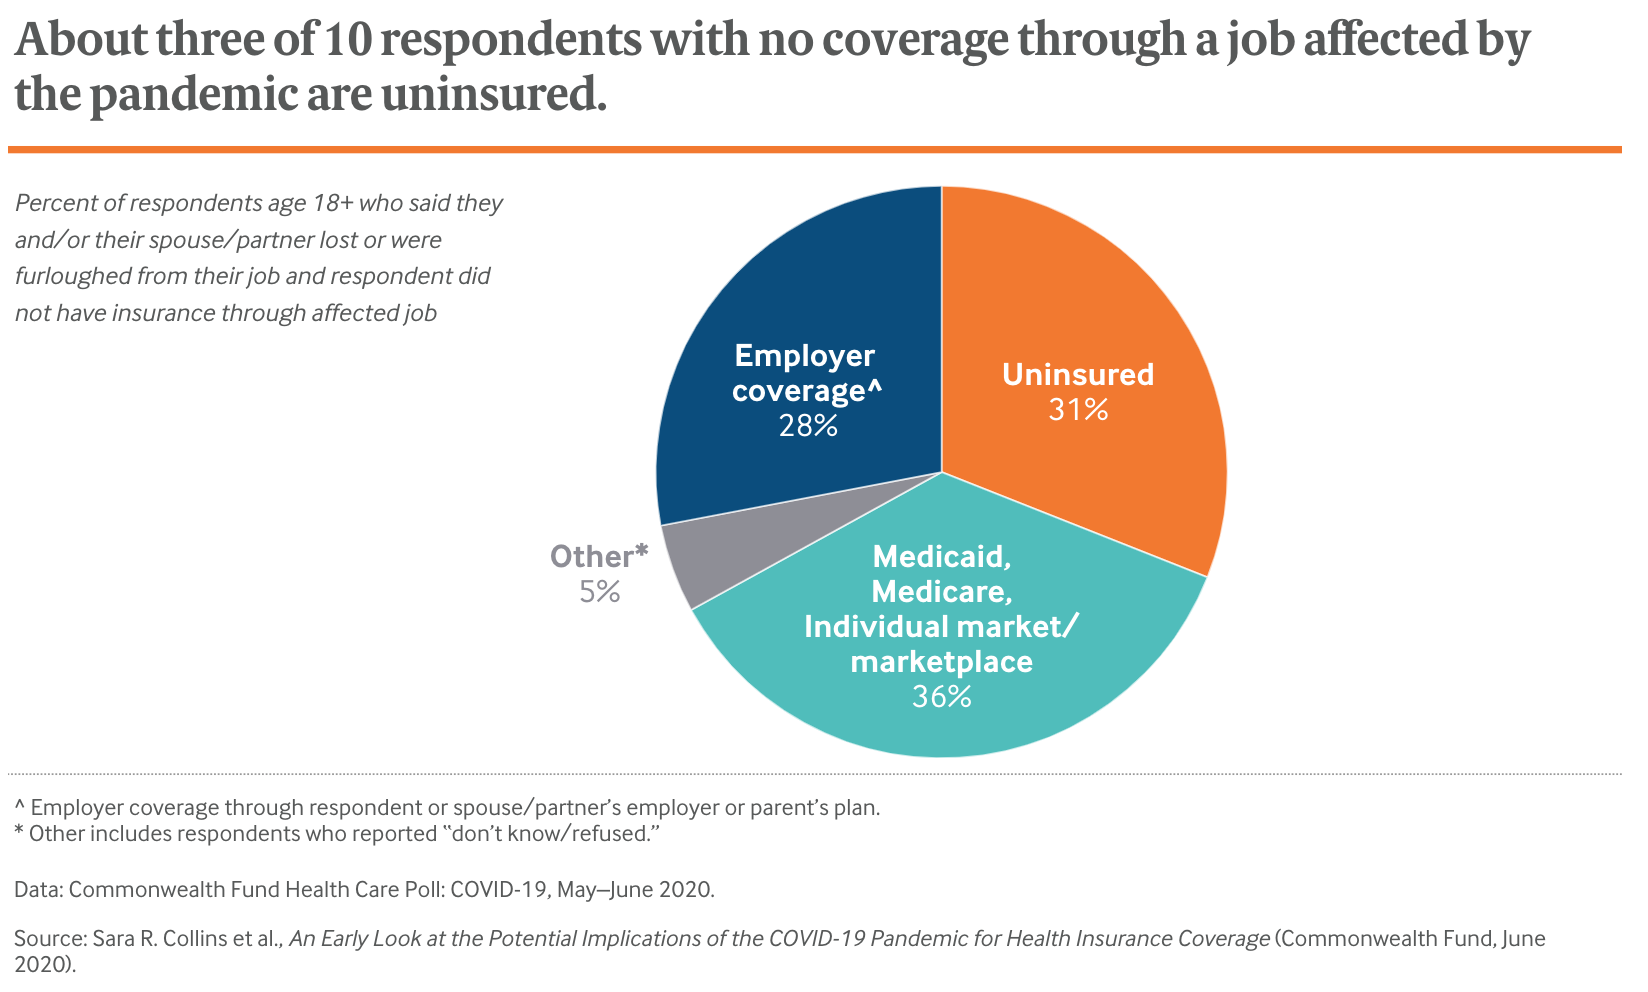 About three of 10 respondents with no coverage through a job affected by the pandemic are uninsured.